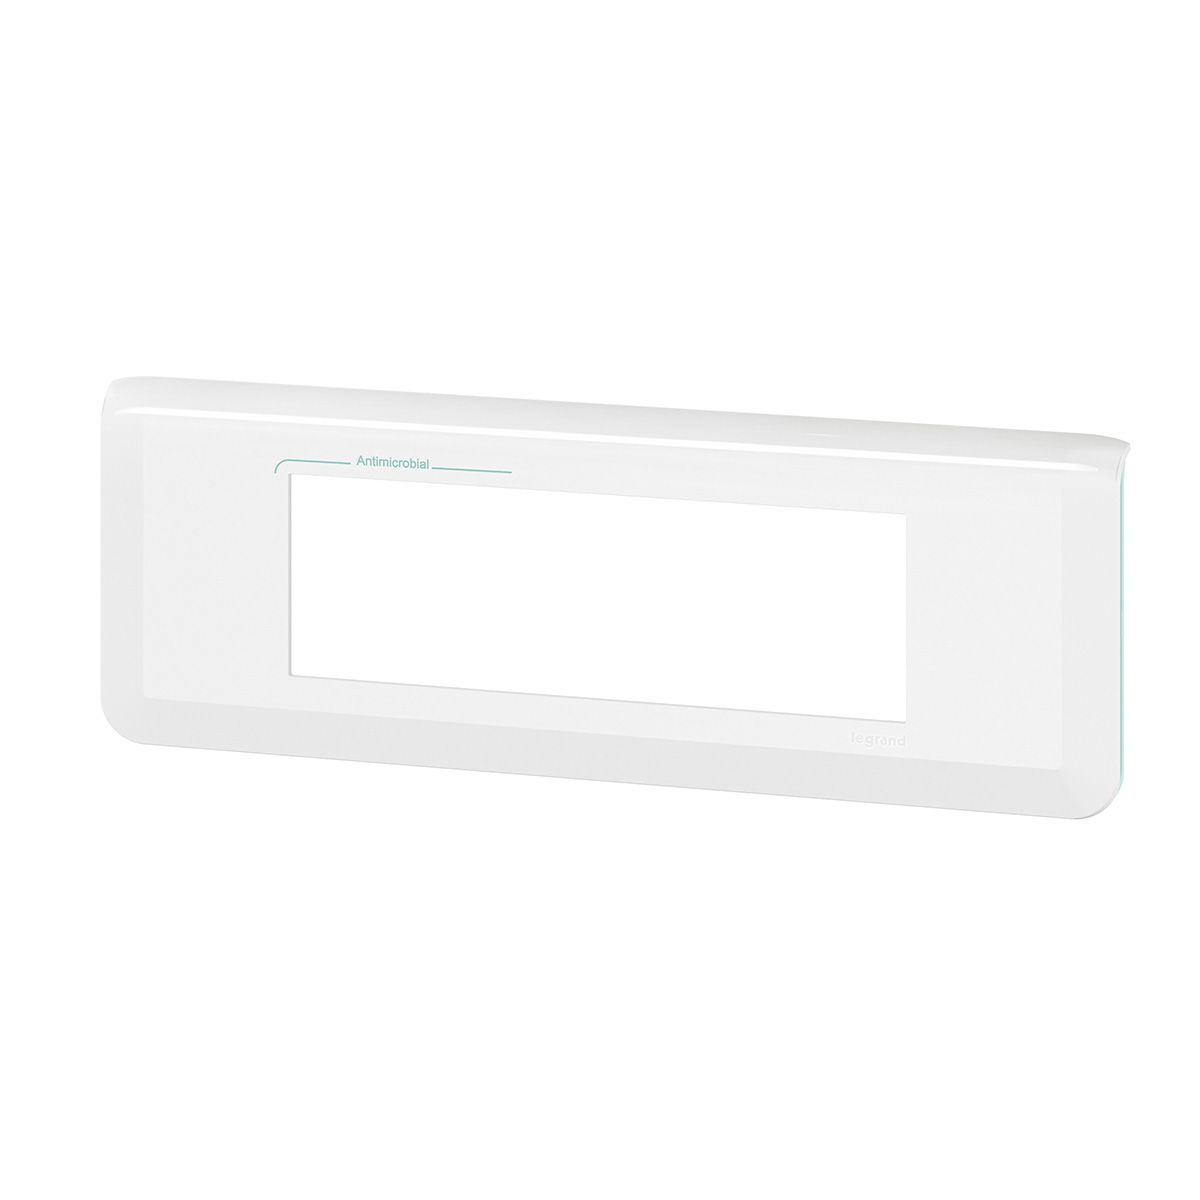 Legrand White 6 Gang Faceplate & Mounting Plate